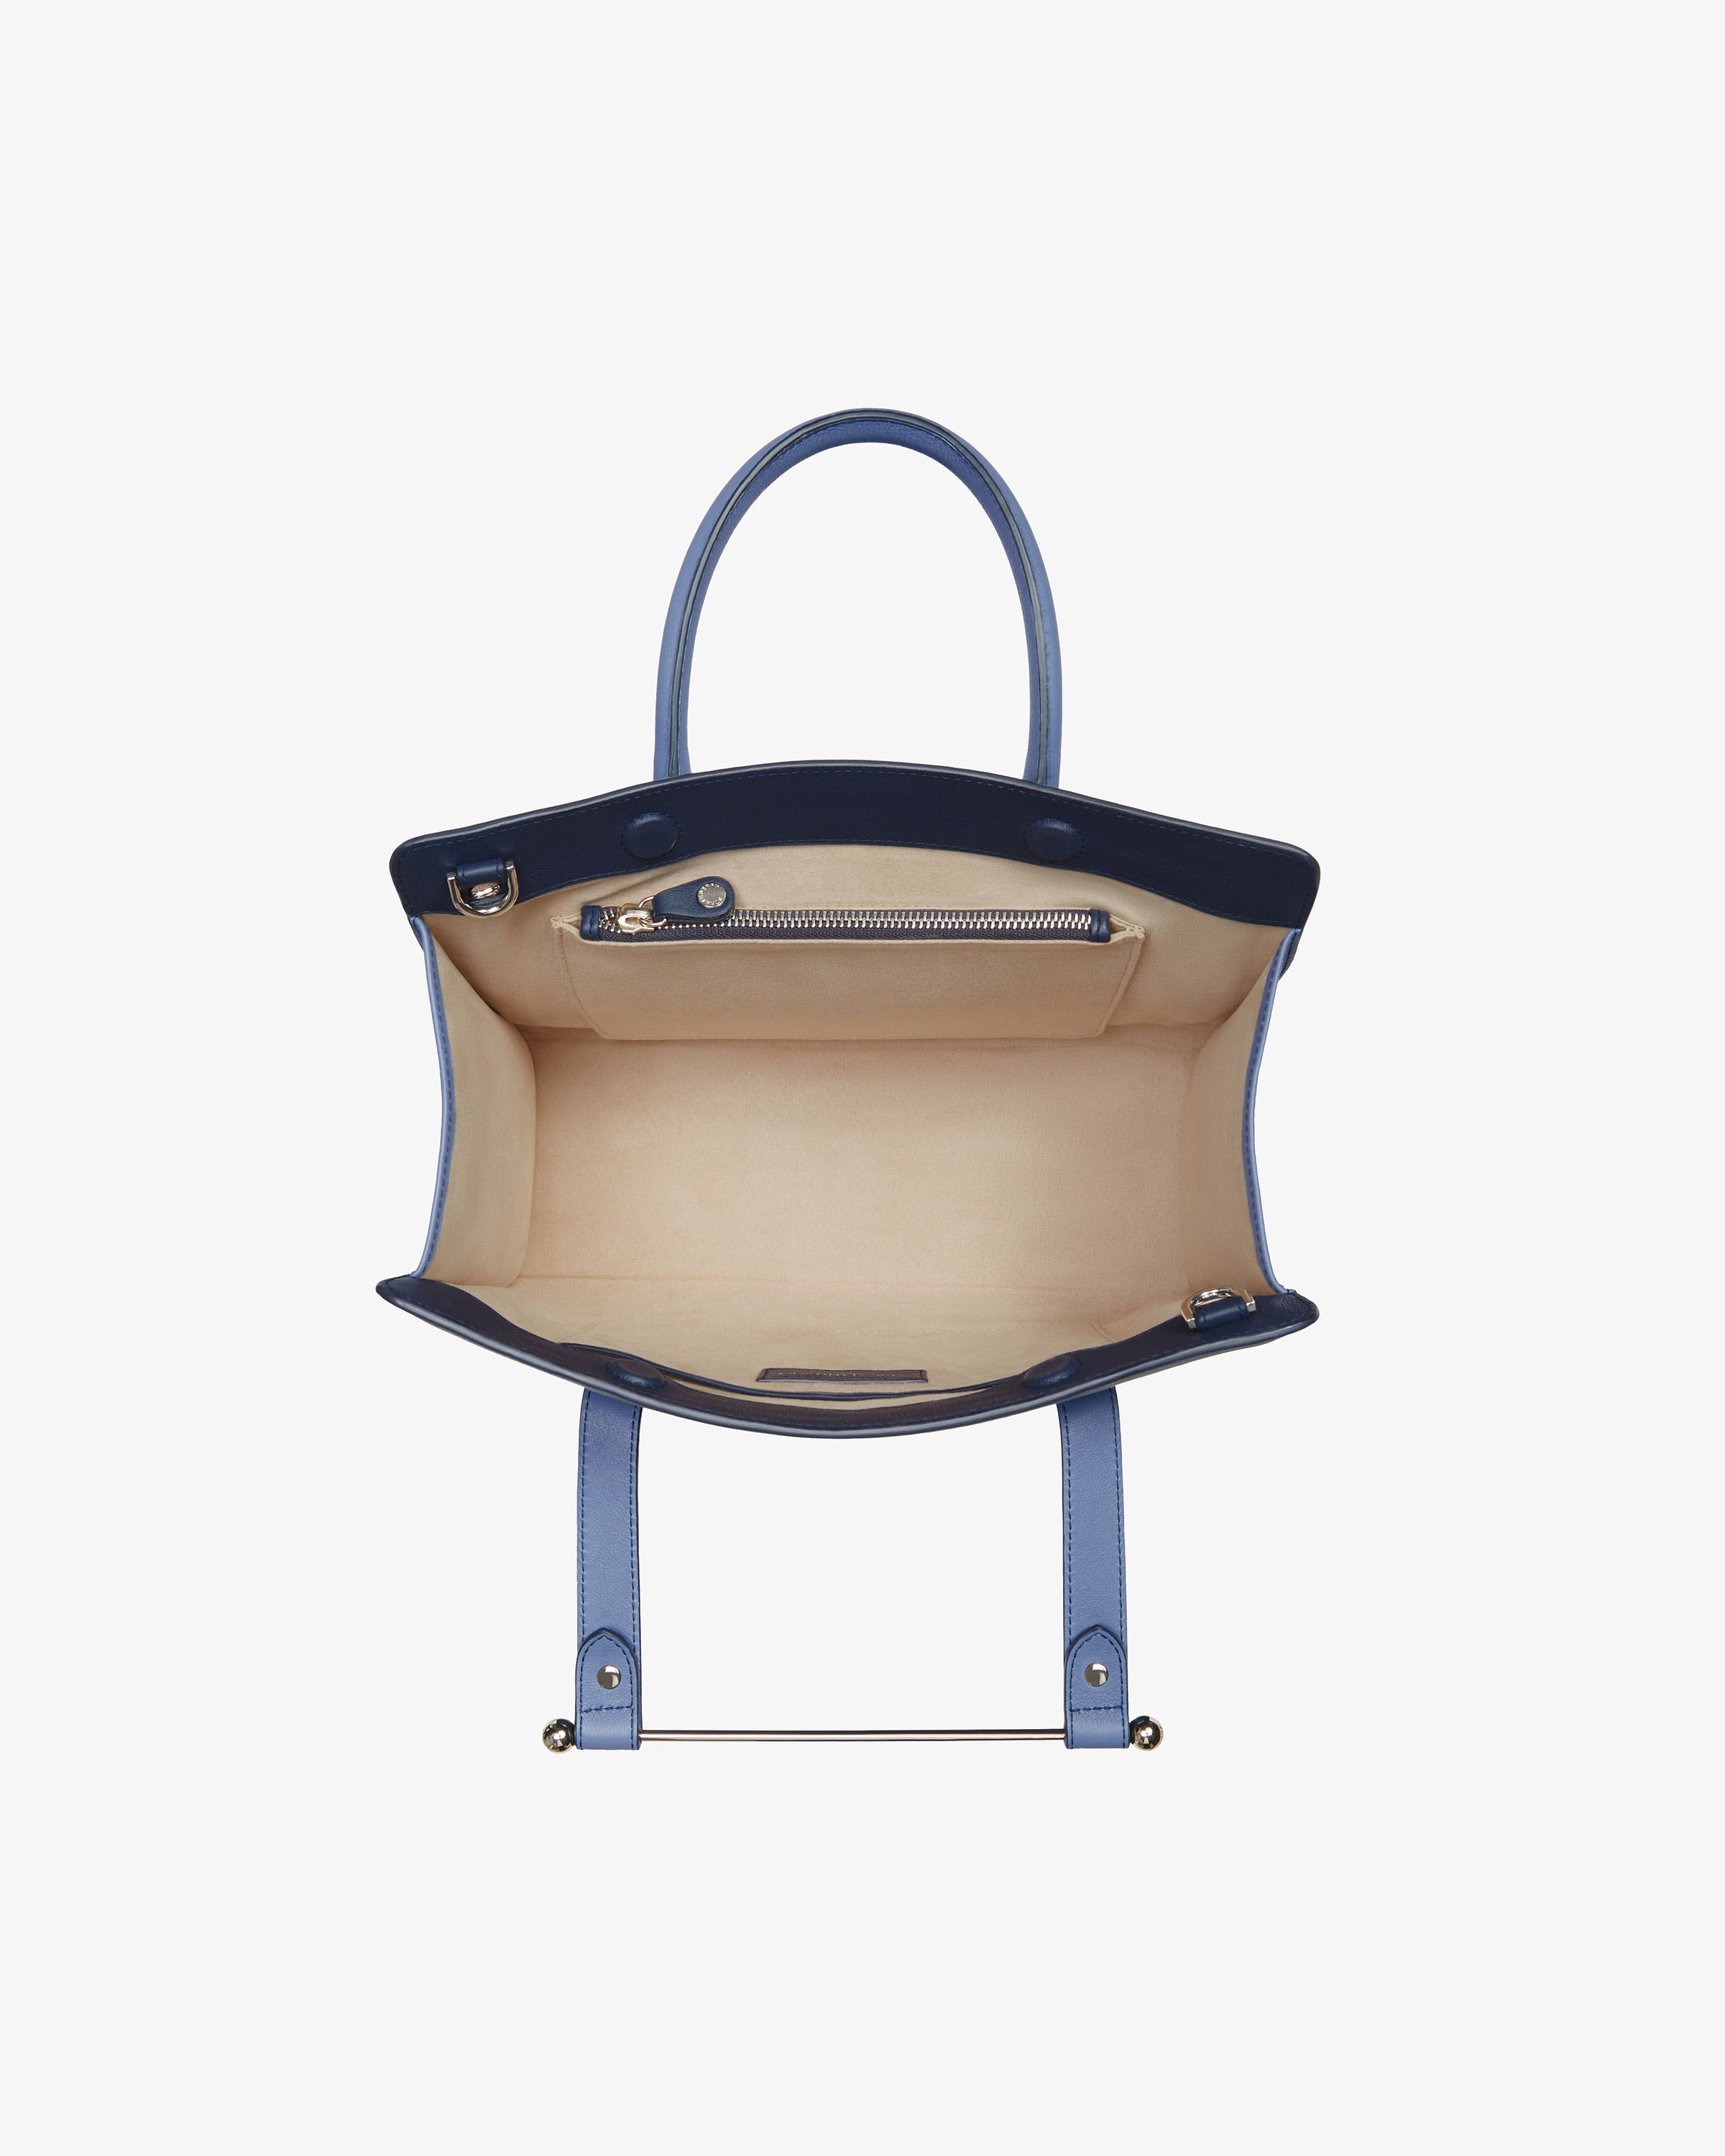 The Strathberry Midi Tote - Top Handle Leather Tote Bag - Blue | Strathberry